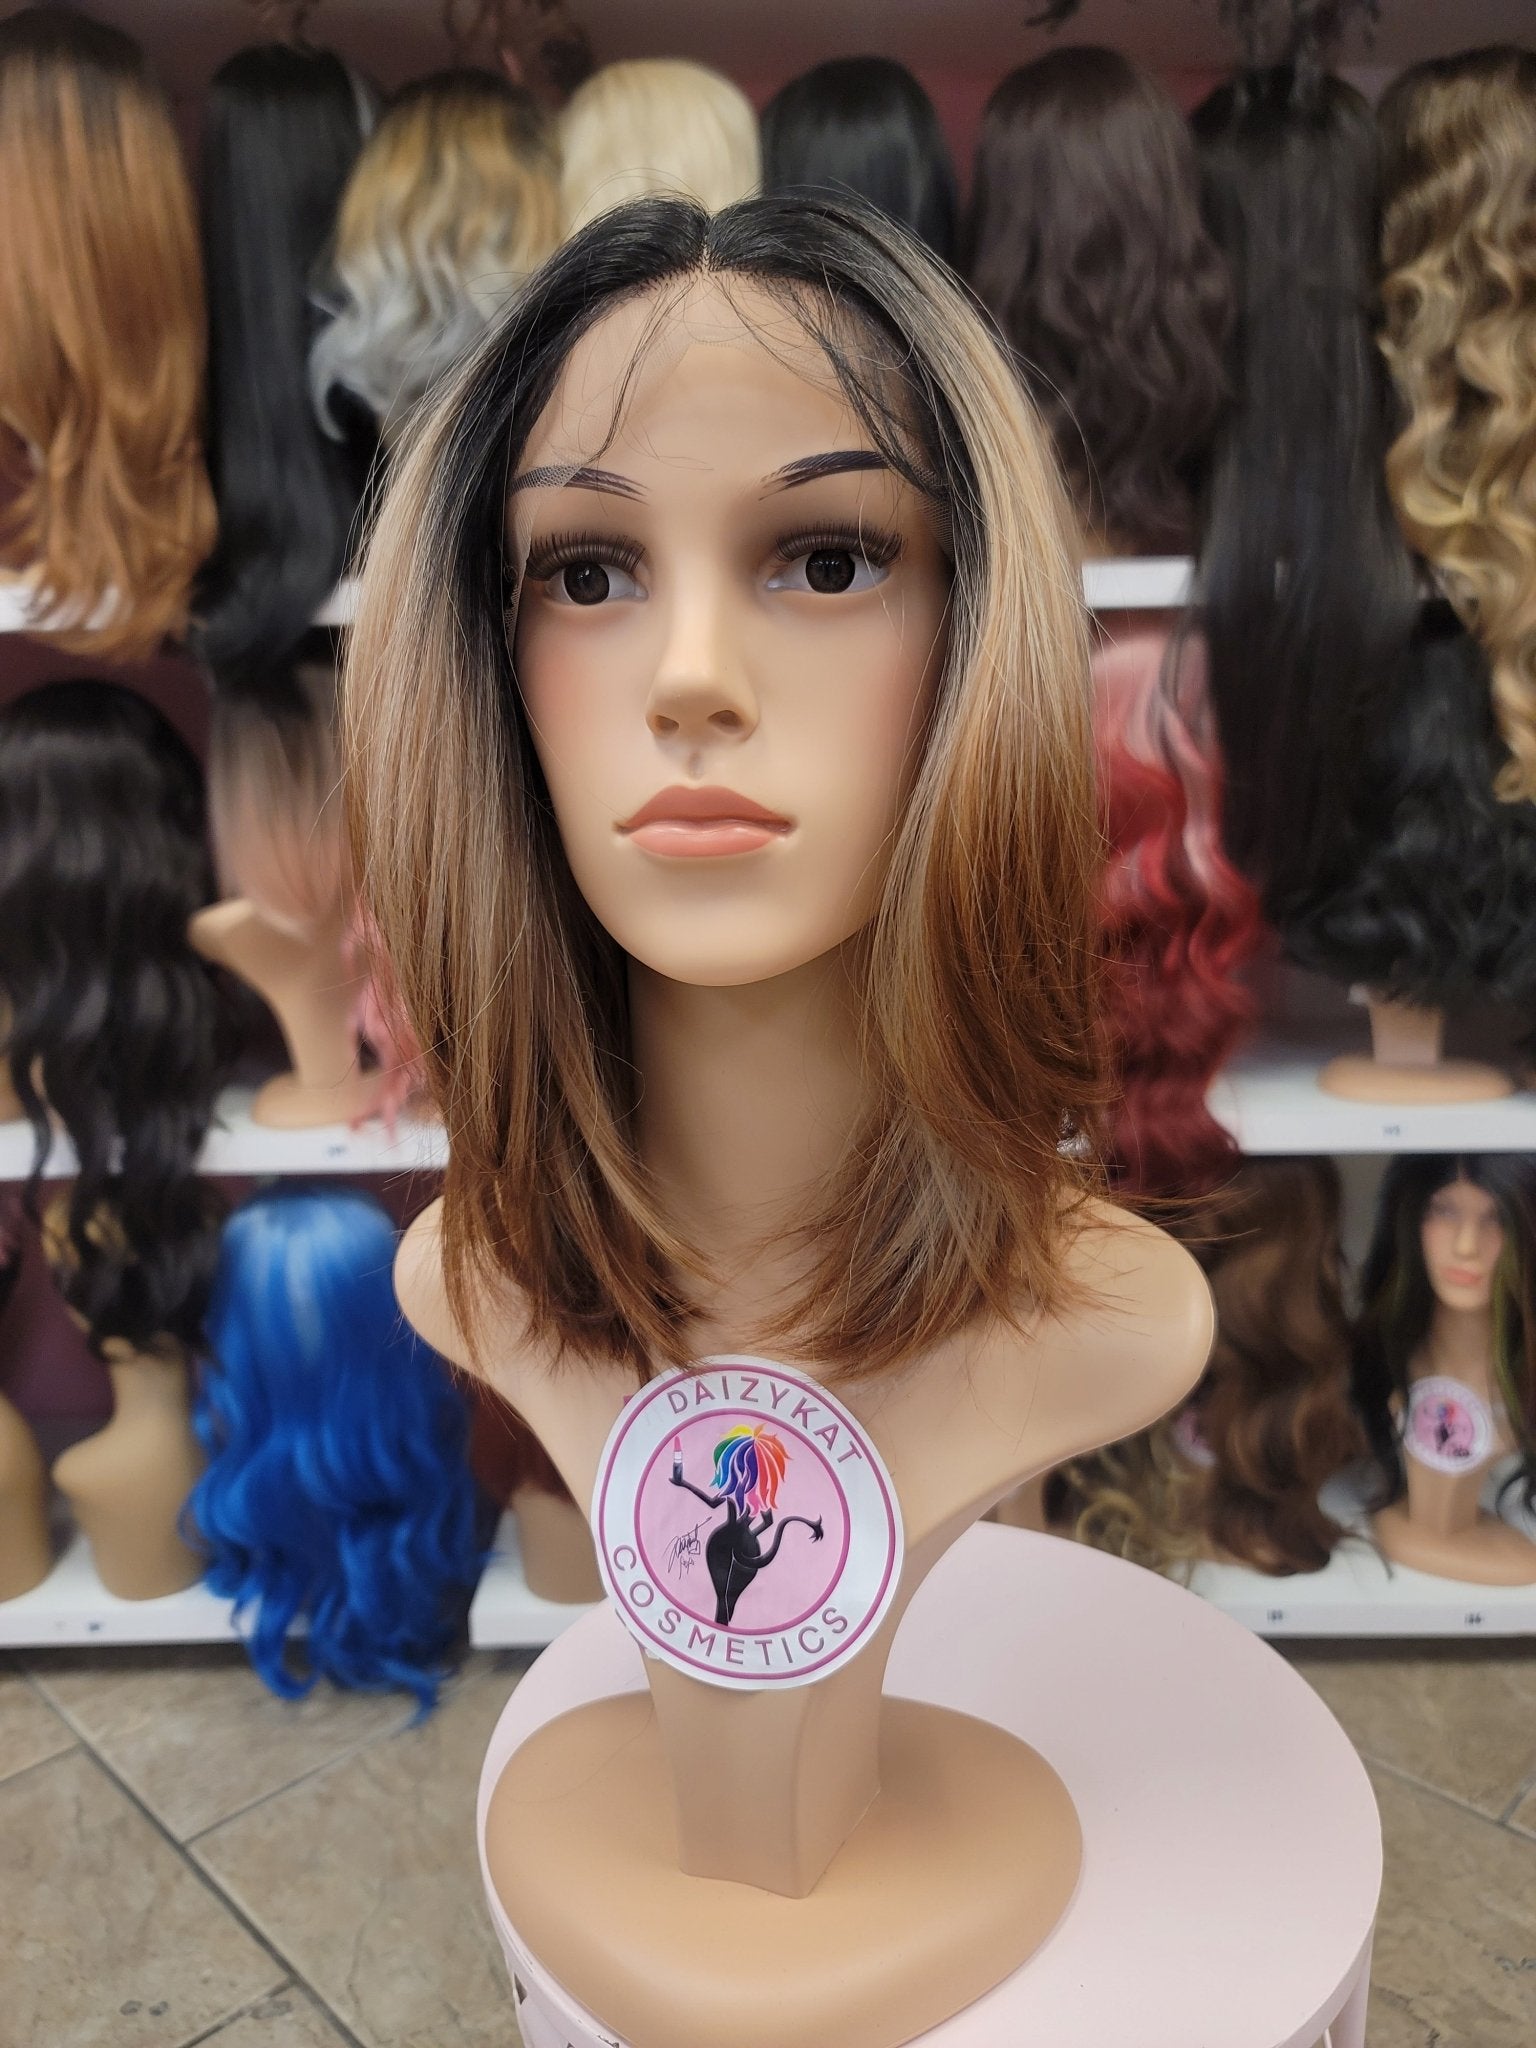 68 Faith Middle Part Lace Front Wig - 4/BLD/BRN - DaizyKat Cosmetics 68 Faith Middle Part Lace Front Wig - 4/BLD/BRN DaizyKat Cosmetics Wigs